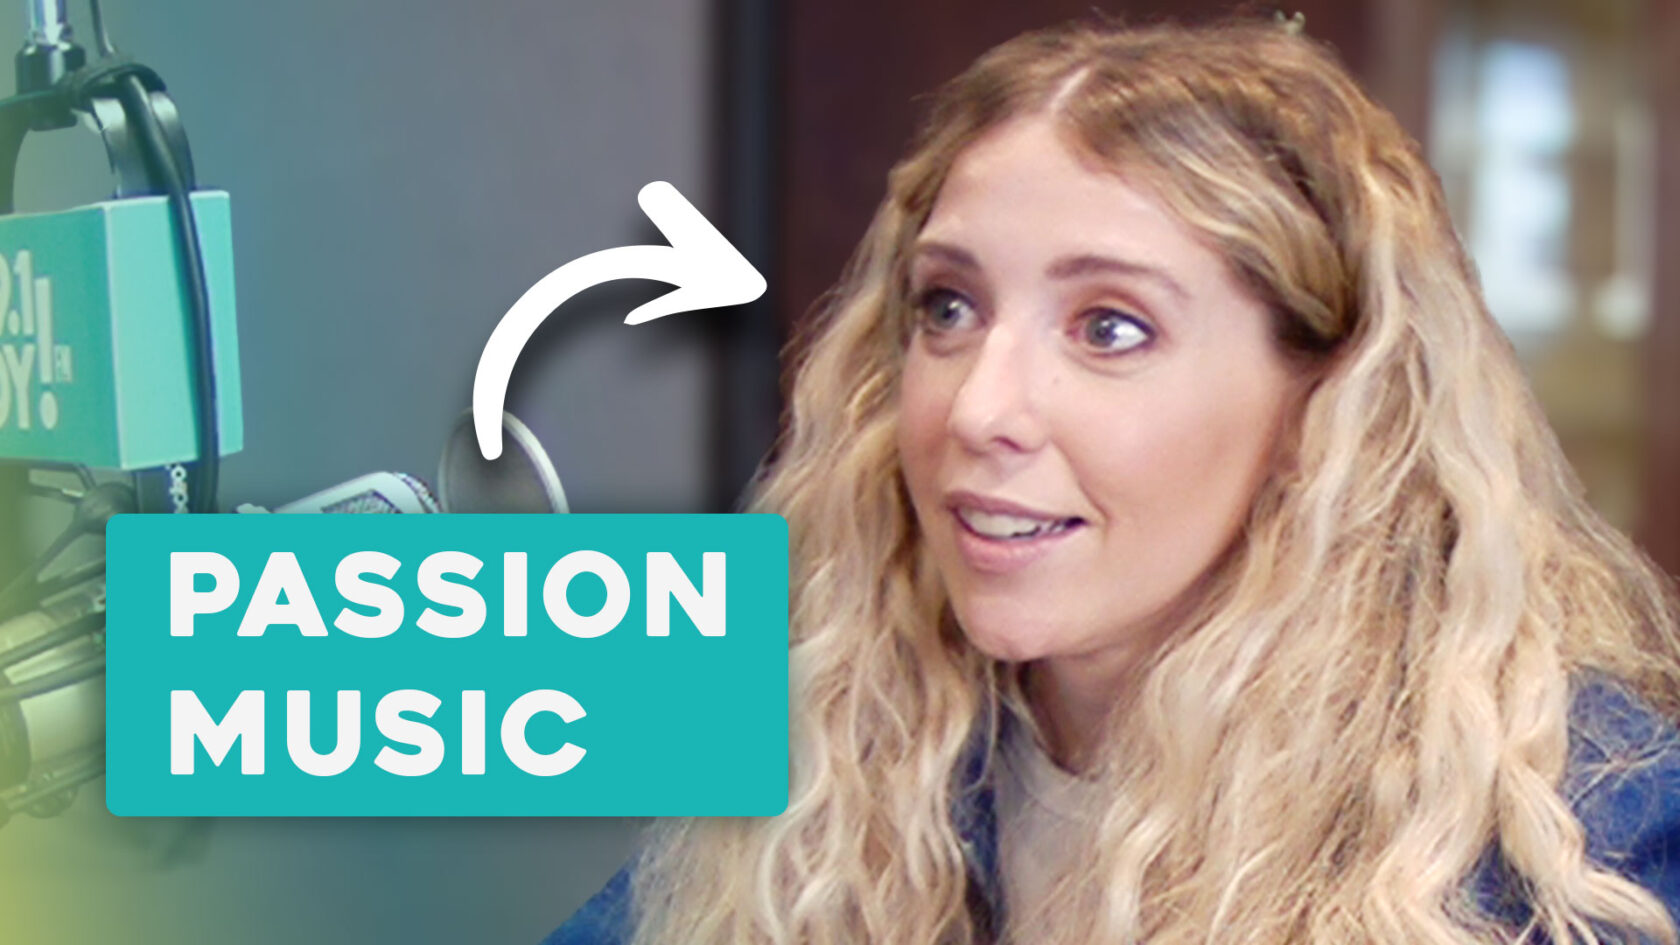 Worship Leader Reacts to Today's Top Worship Songs (featuring Passion Music)